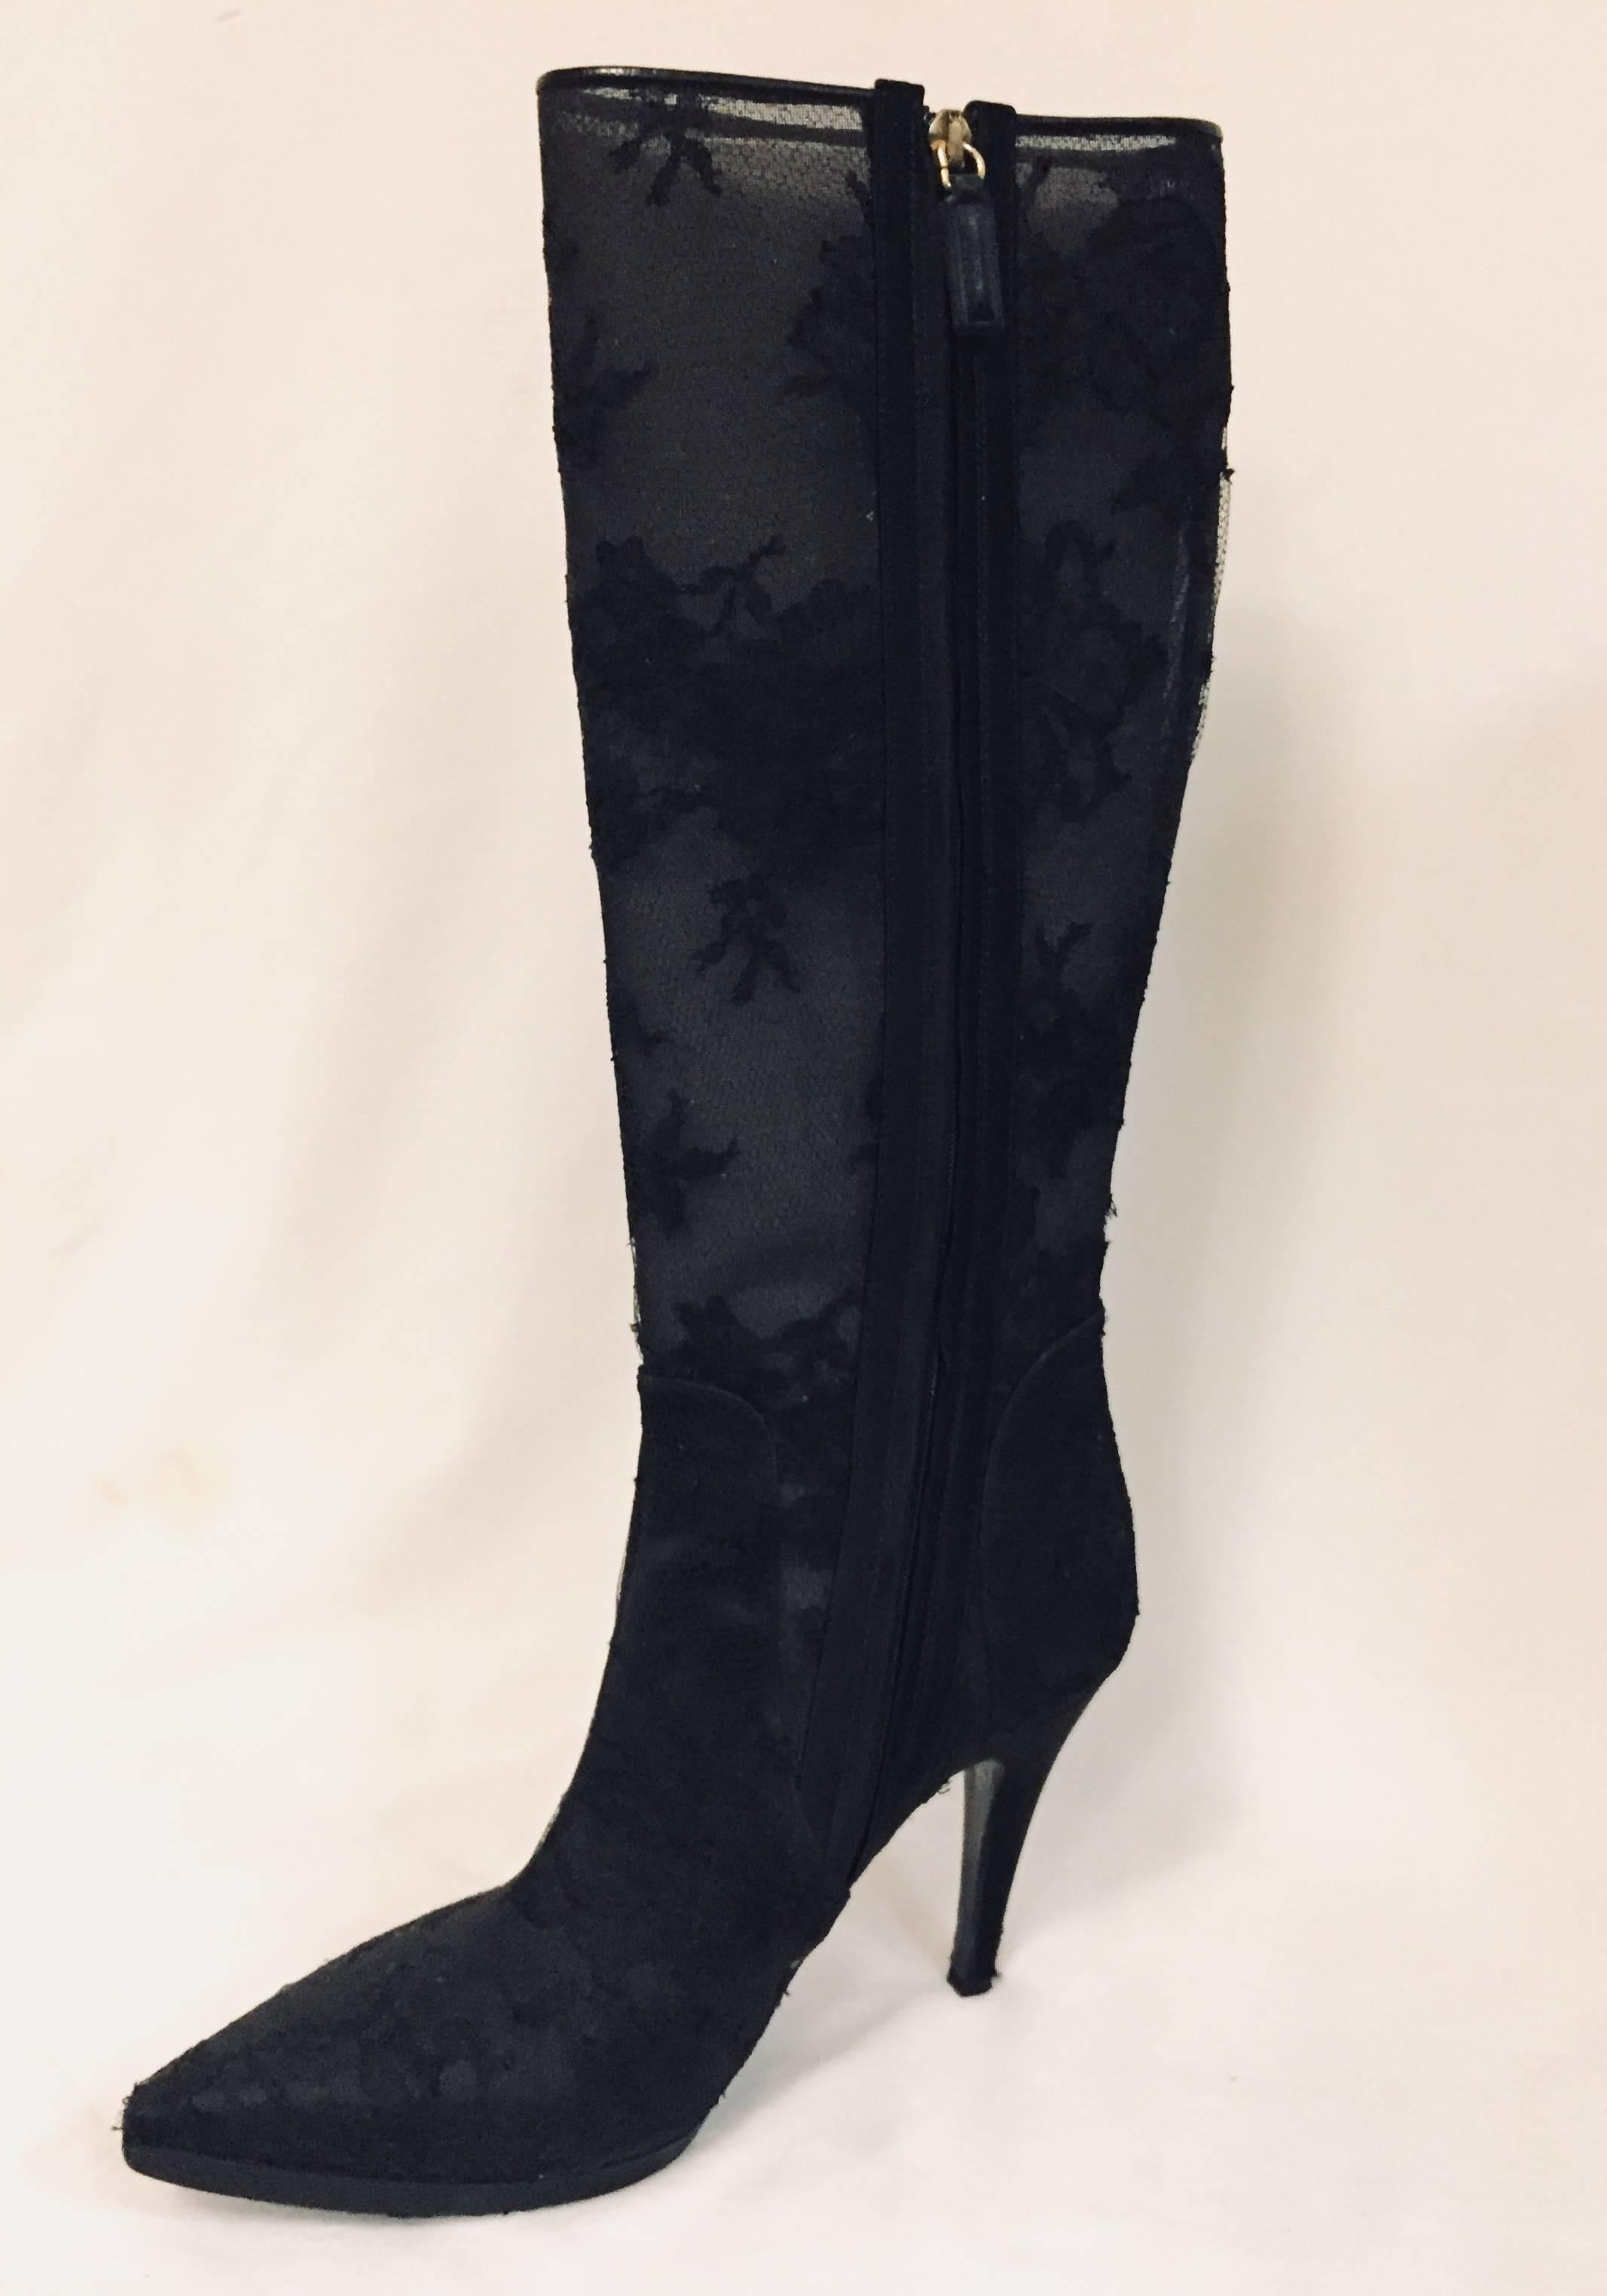 Valentino black mesh lace pointed toe boots with satin and leather trim.  These sexy  knee high boots can be worn with almost anything!  Oh, yes, these Valentino boots are made for more than walking!   The vamp is lined in black satin as well as the